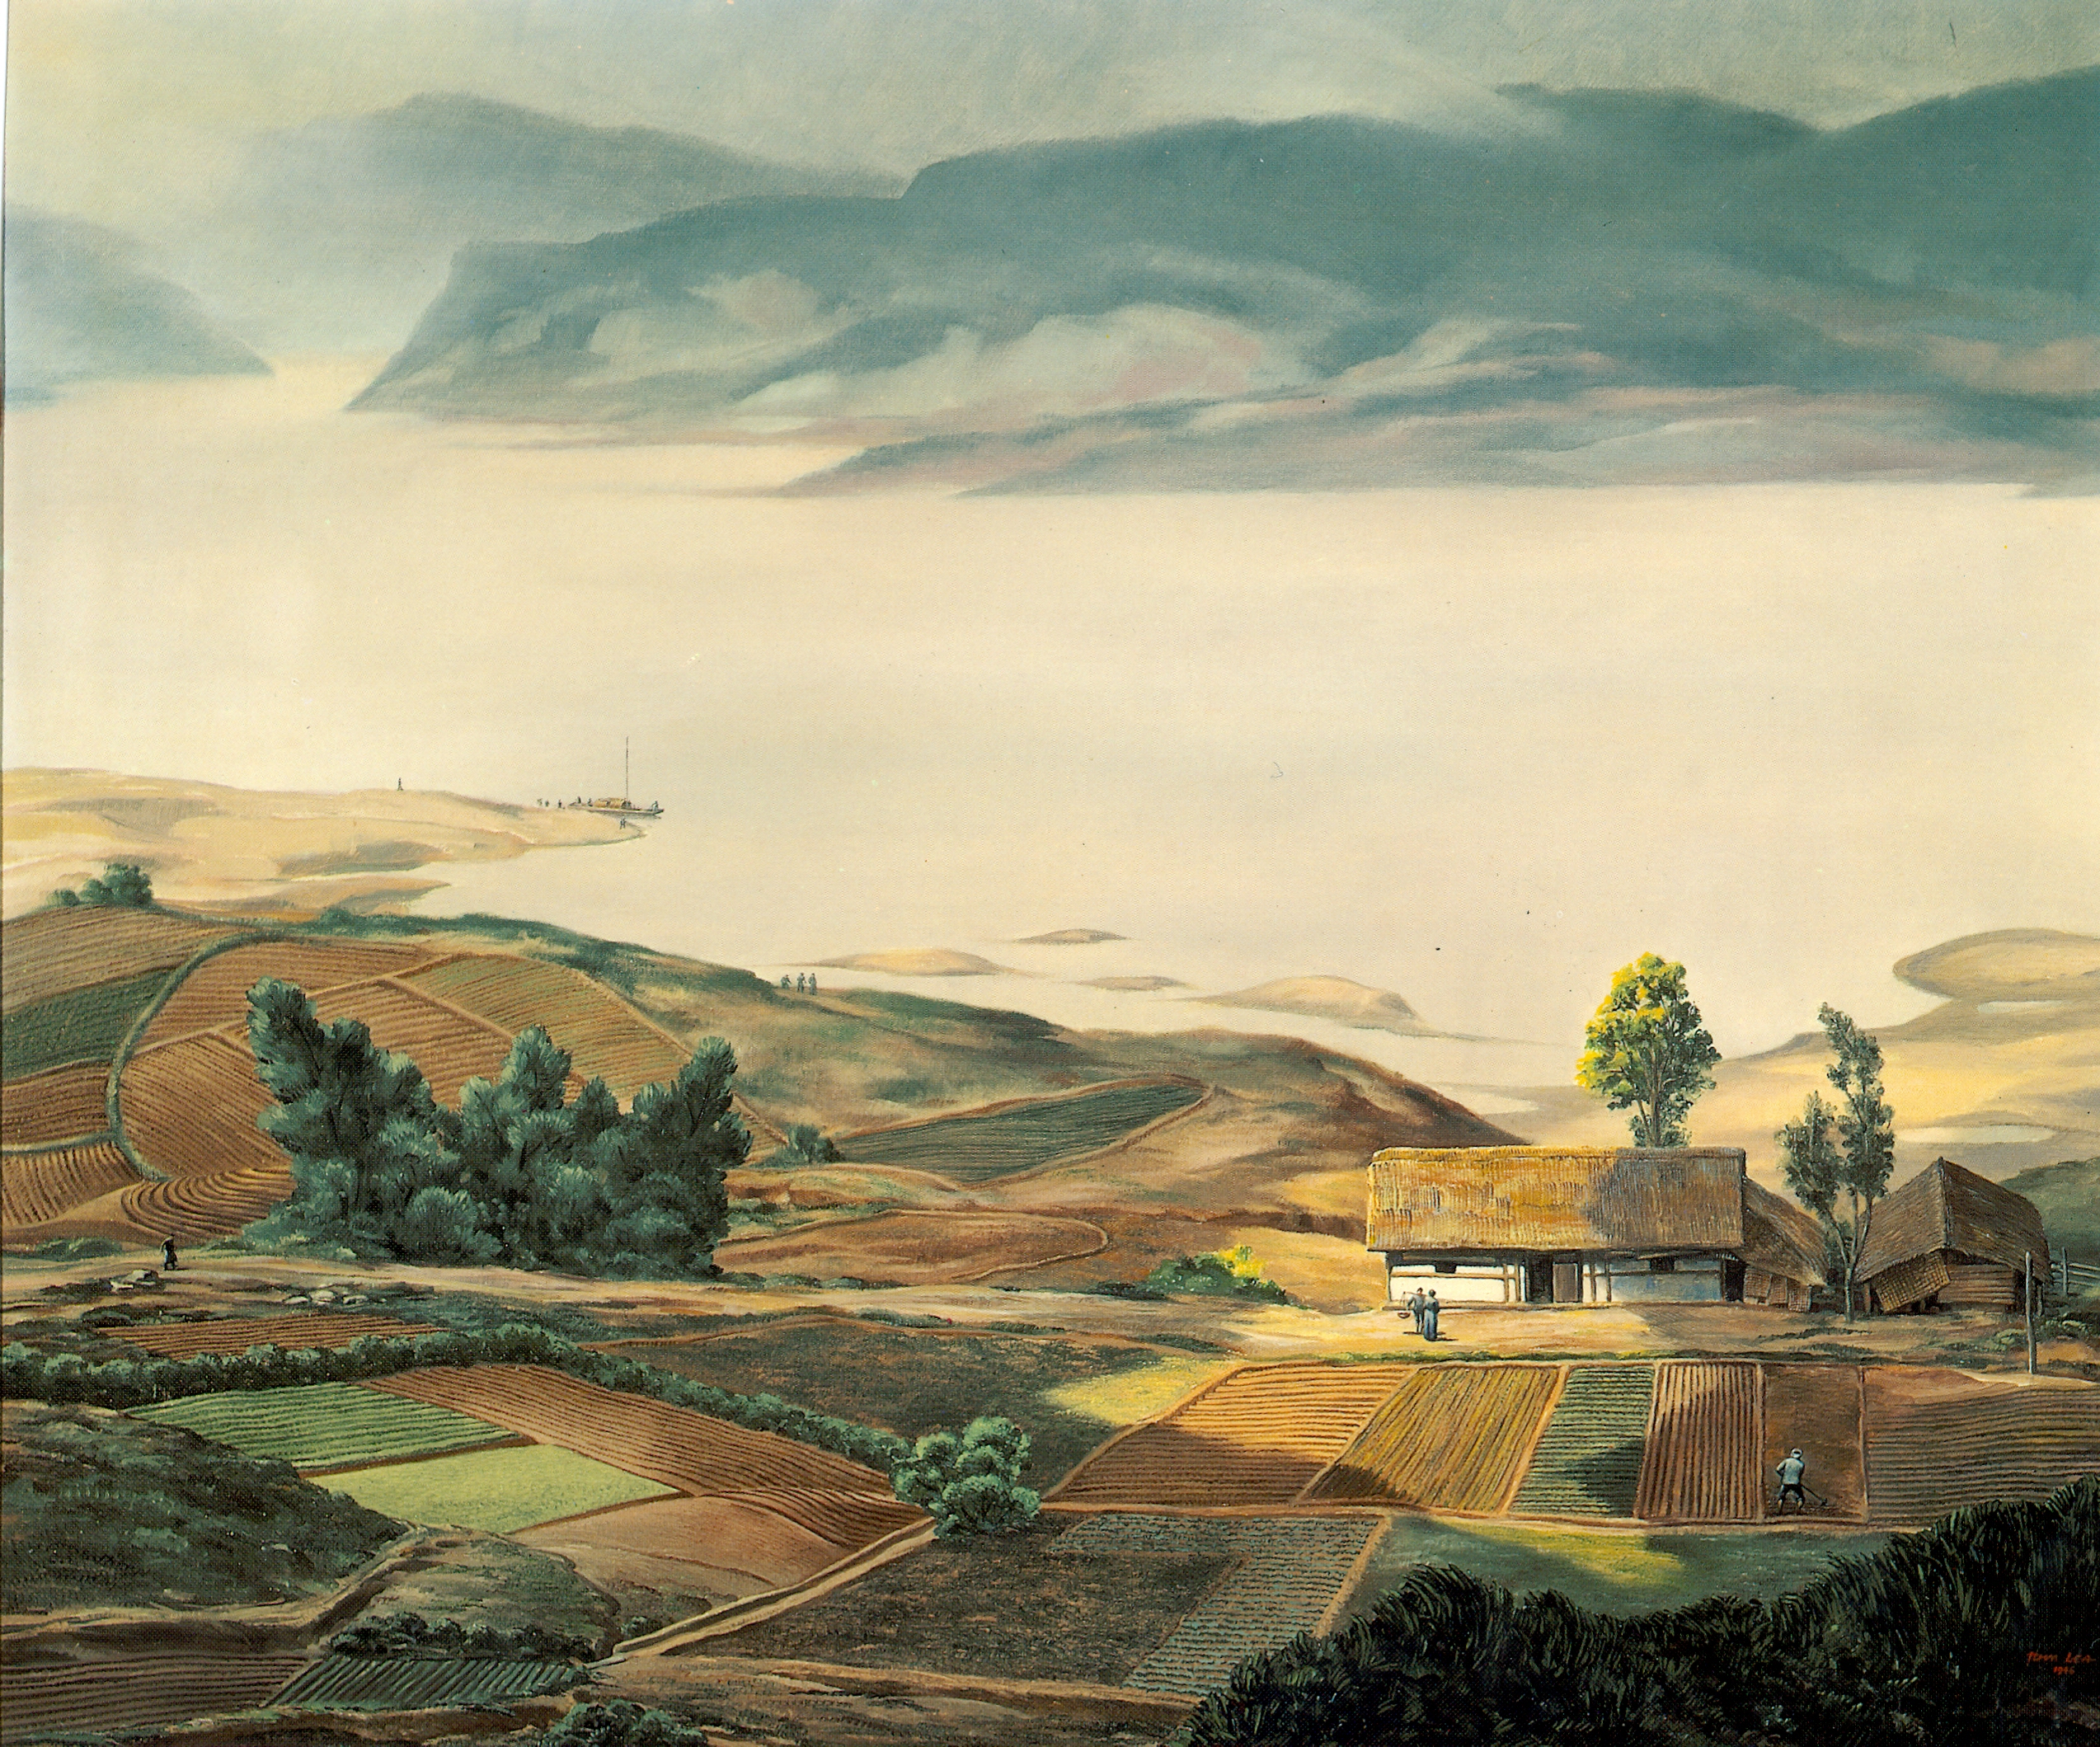 Tom Lea, Dream of a Fair River, Yangtze, oil on canvas, 1964, 27in x 32in, Collection of Dr. and Mrs. Robert B. Homan Jr. El Paso, TX.